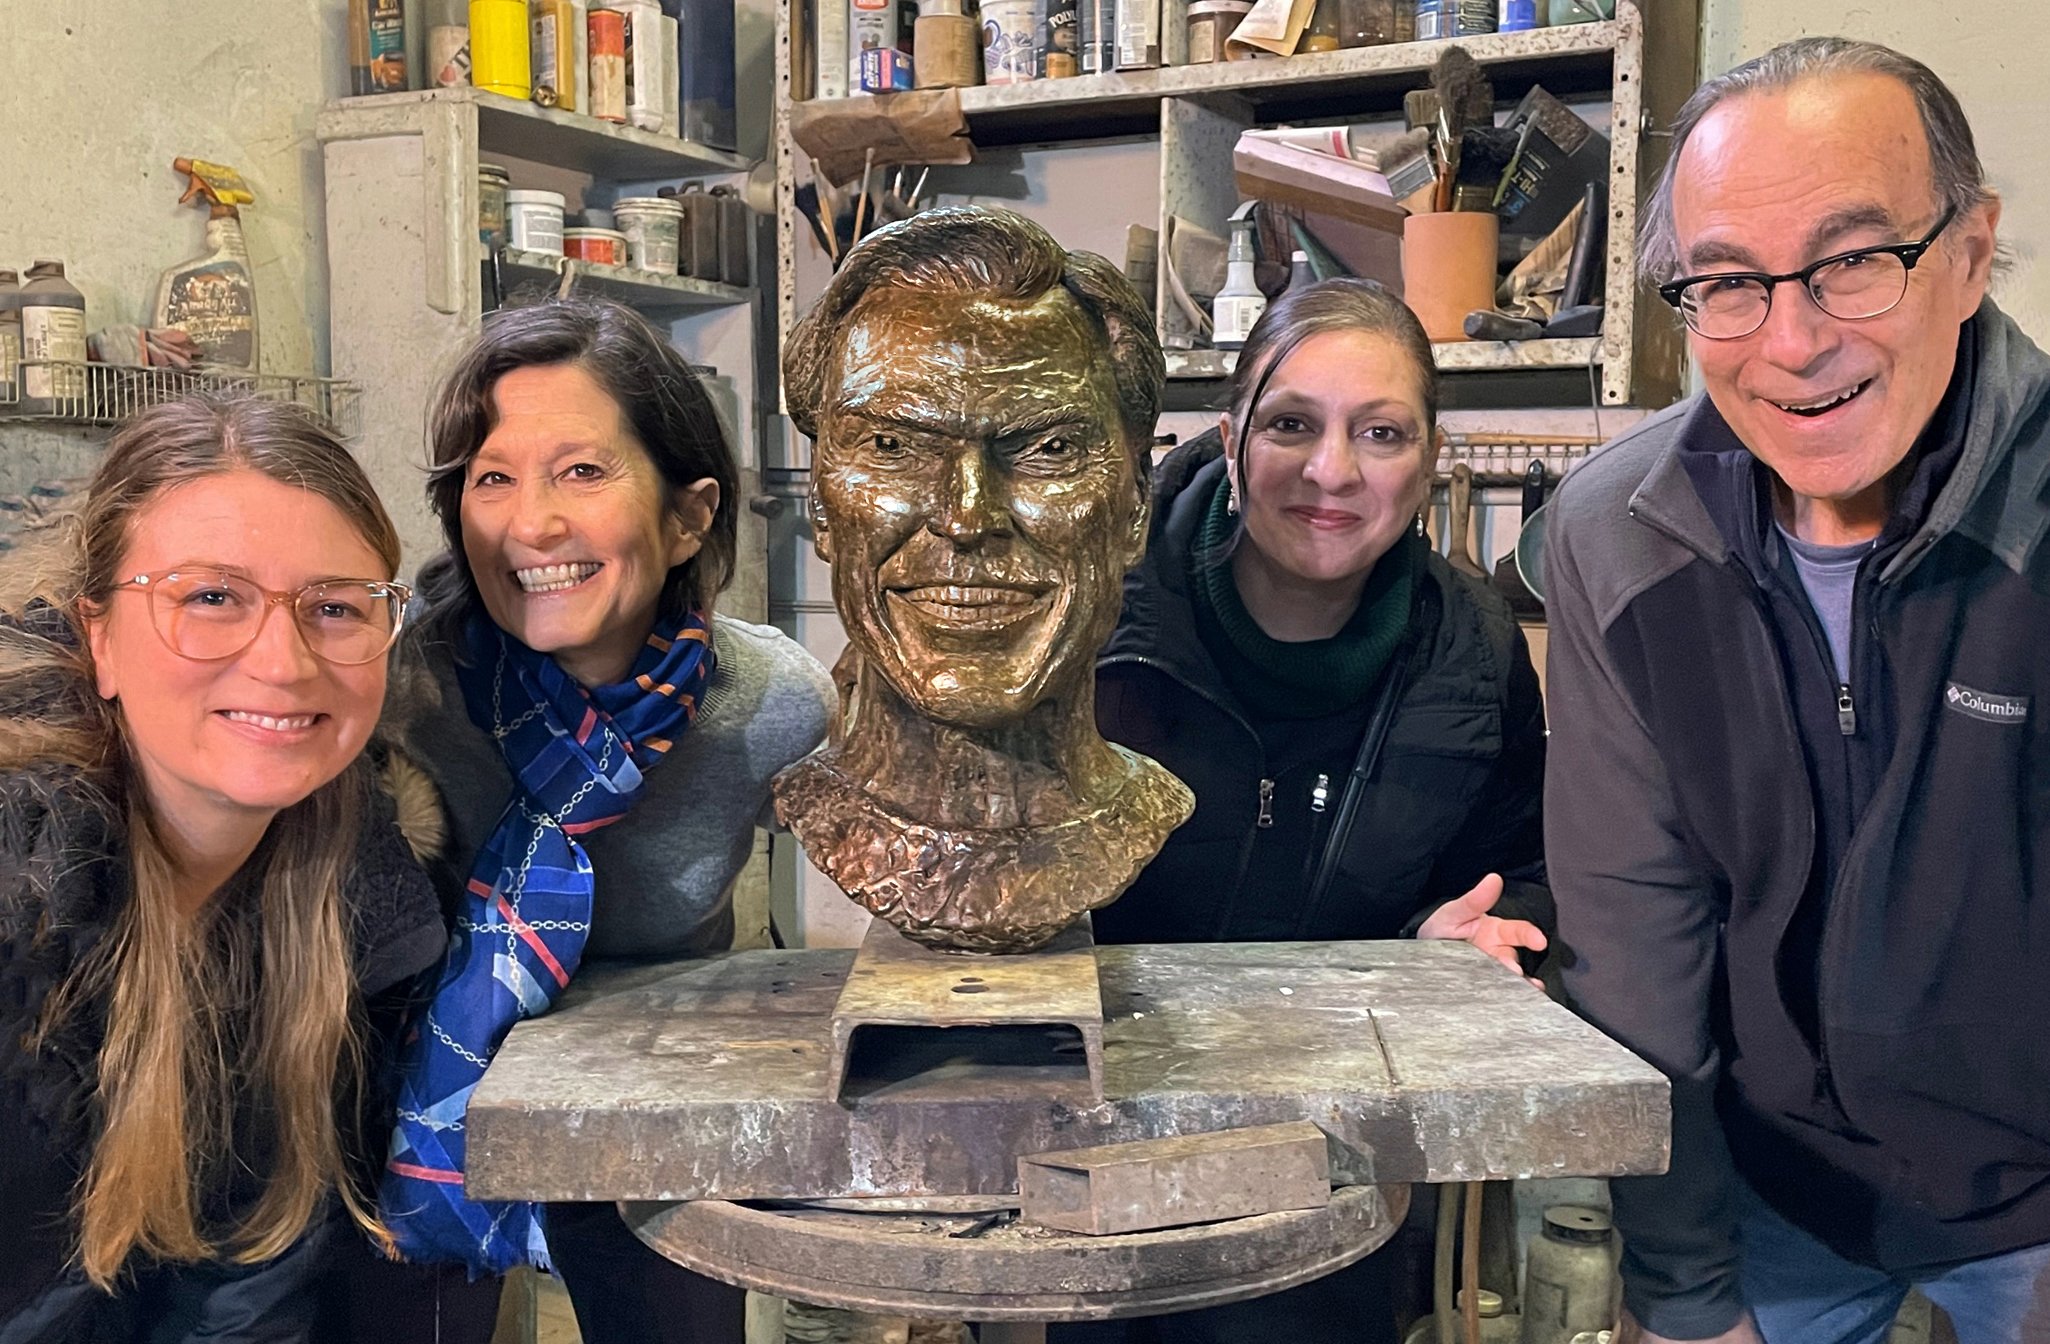 National Dance Leadership with the bronze bust and Marc, Bedi-Makky Art Foundry